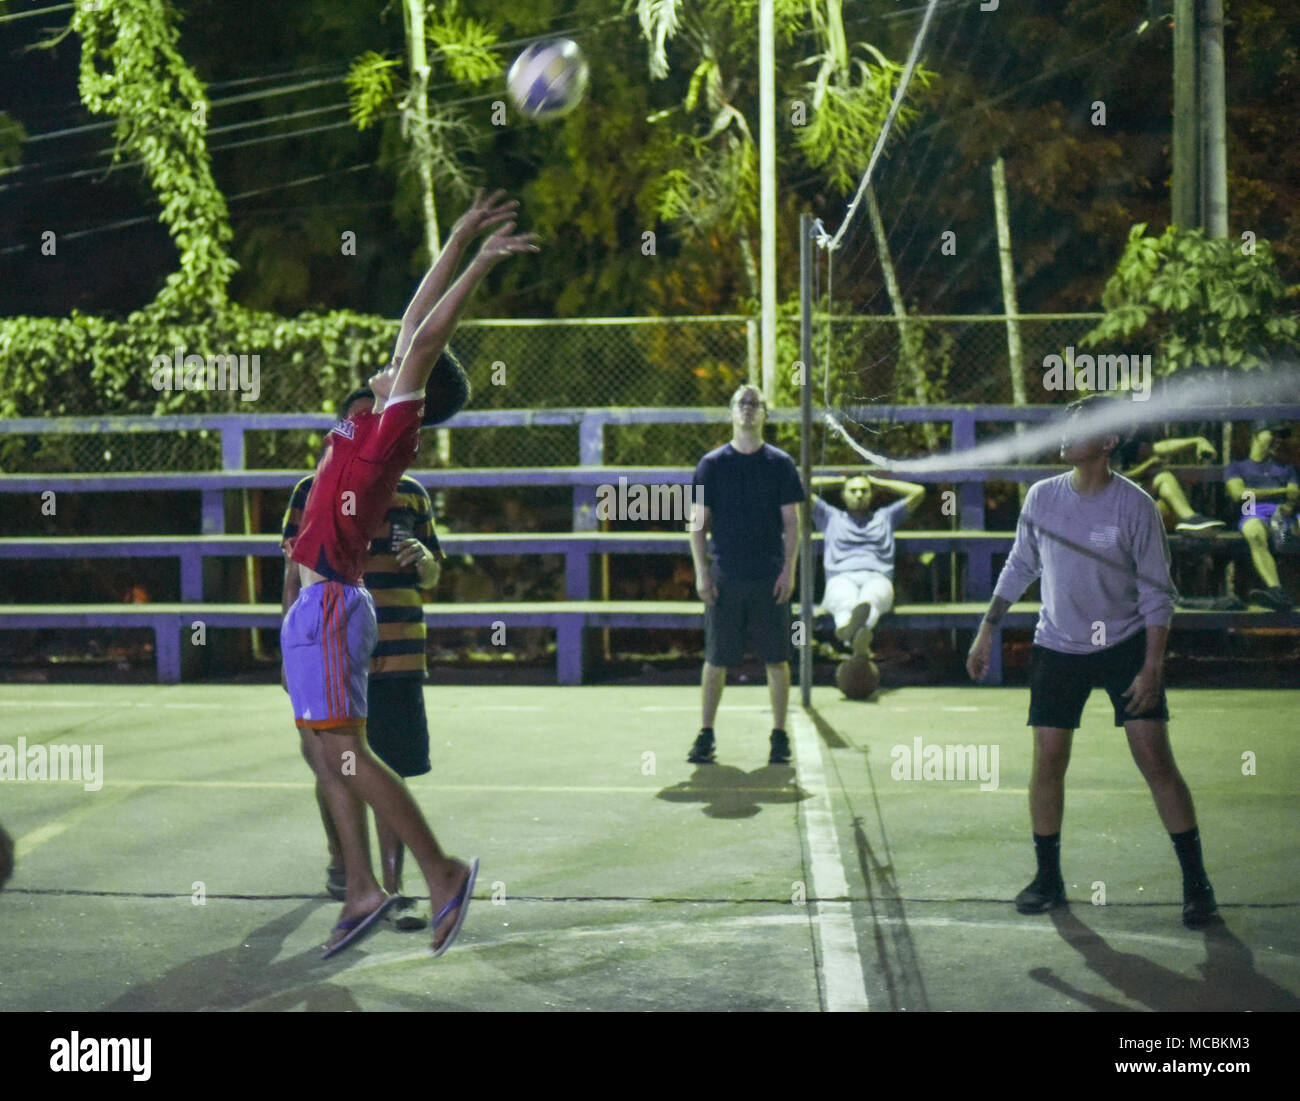 A Meteti, Panama, local citizen hits a ball during a volleyball match with U.S. military members participating in Exercise New Horizons 2018, March 27, 2018. Throughout the duration of the exercise, participants spend time engaging in sports and fun activities within the local community Exercise New Horizons is a joint training exercise where all branches of the U.S. military conduct training in civil engineer, medical and support services while benefiting the local community. Stock Photo